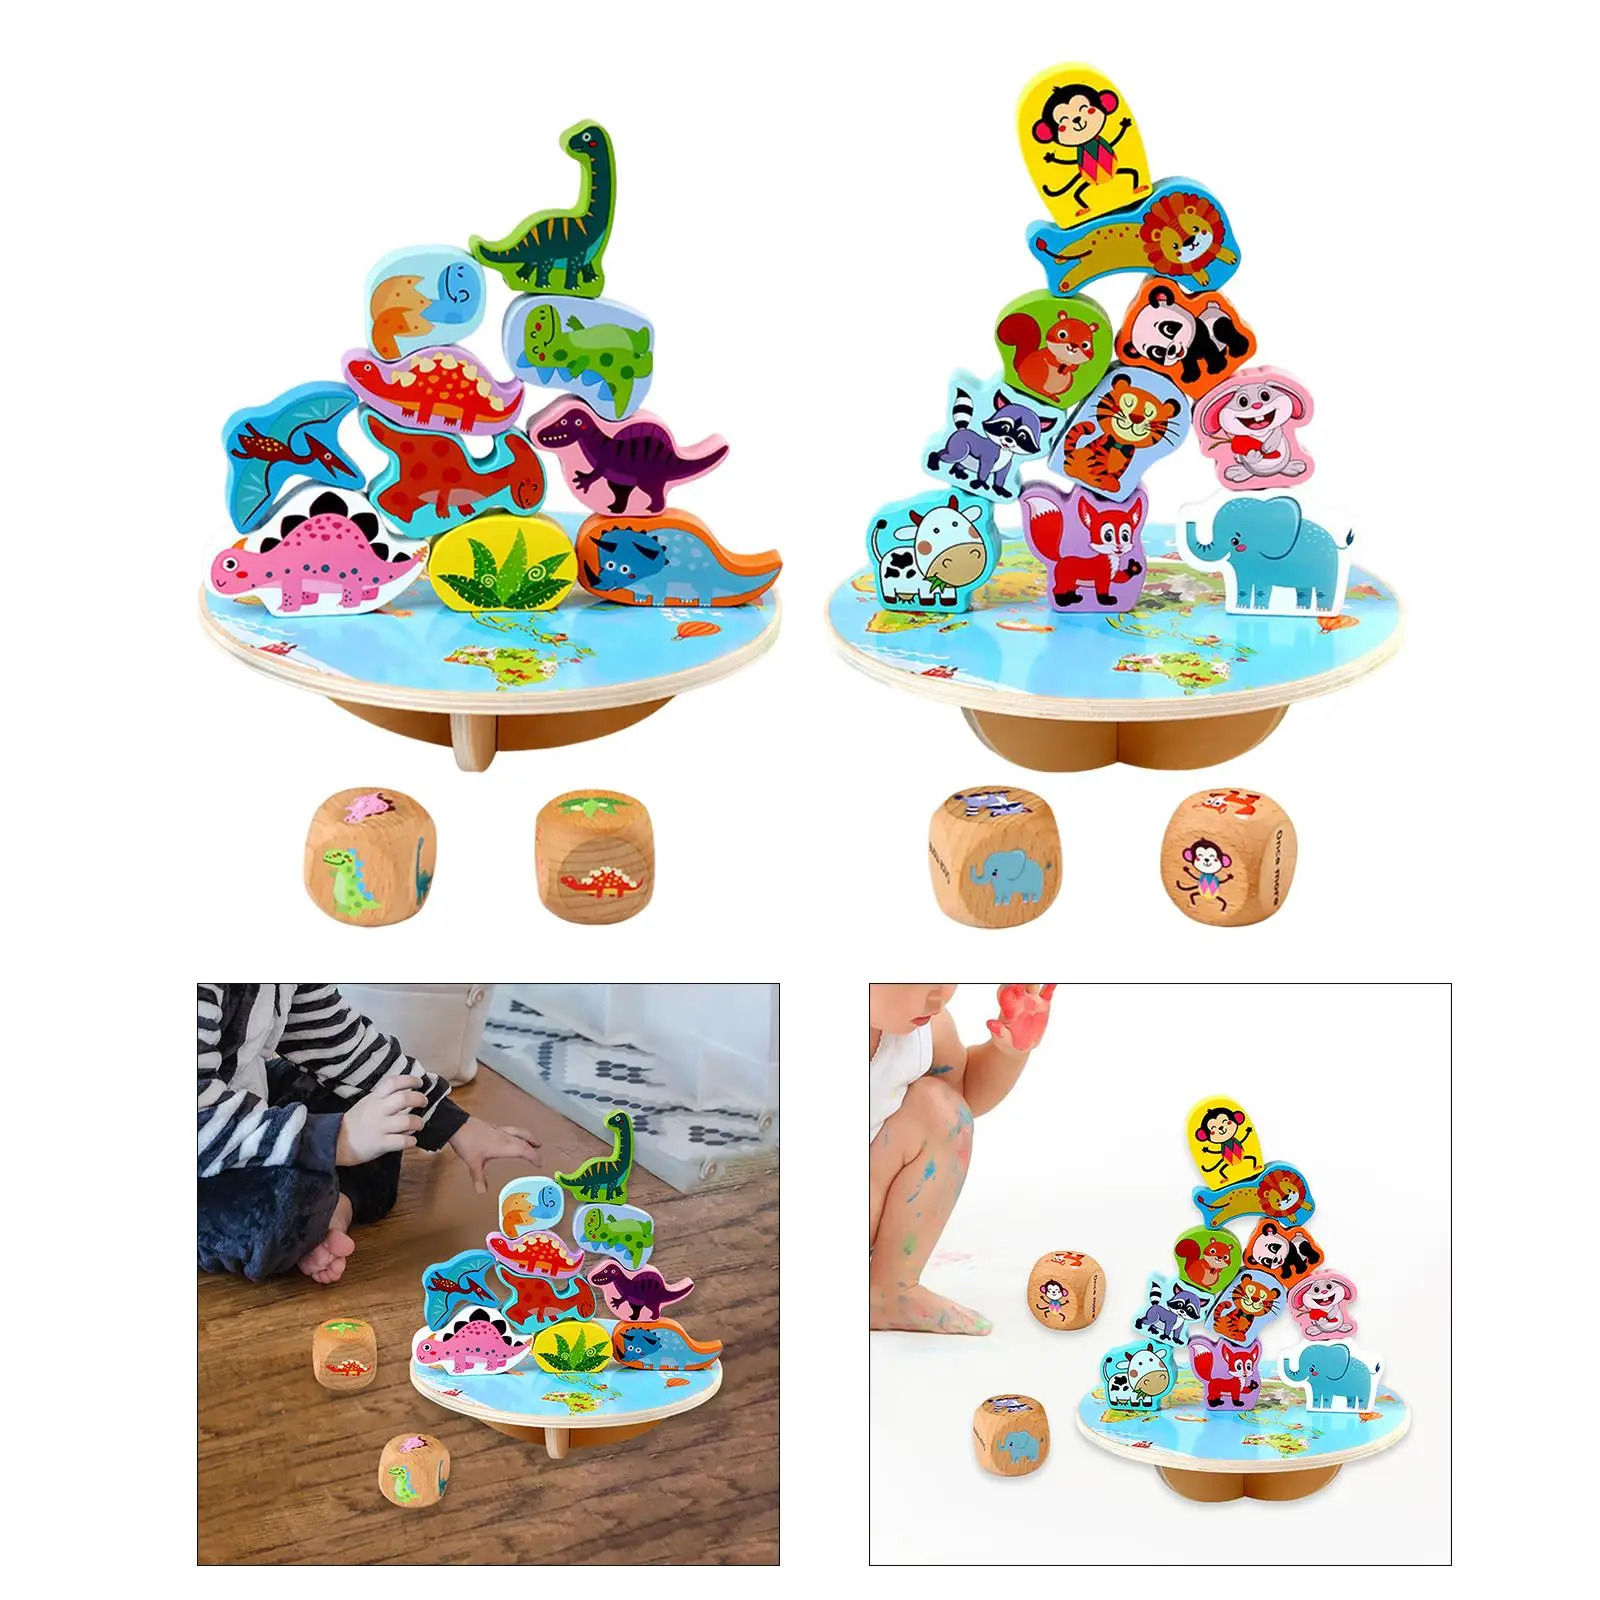 Balance Game Games Early Educational Toy Activity Puzzles for Age 4 Kids